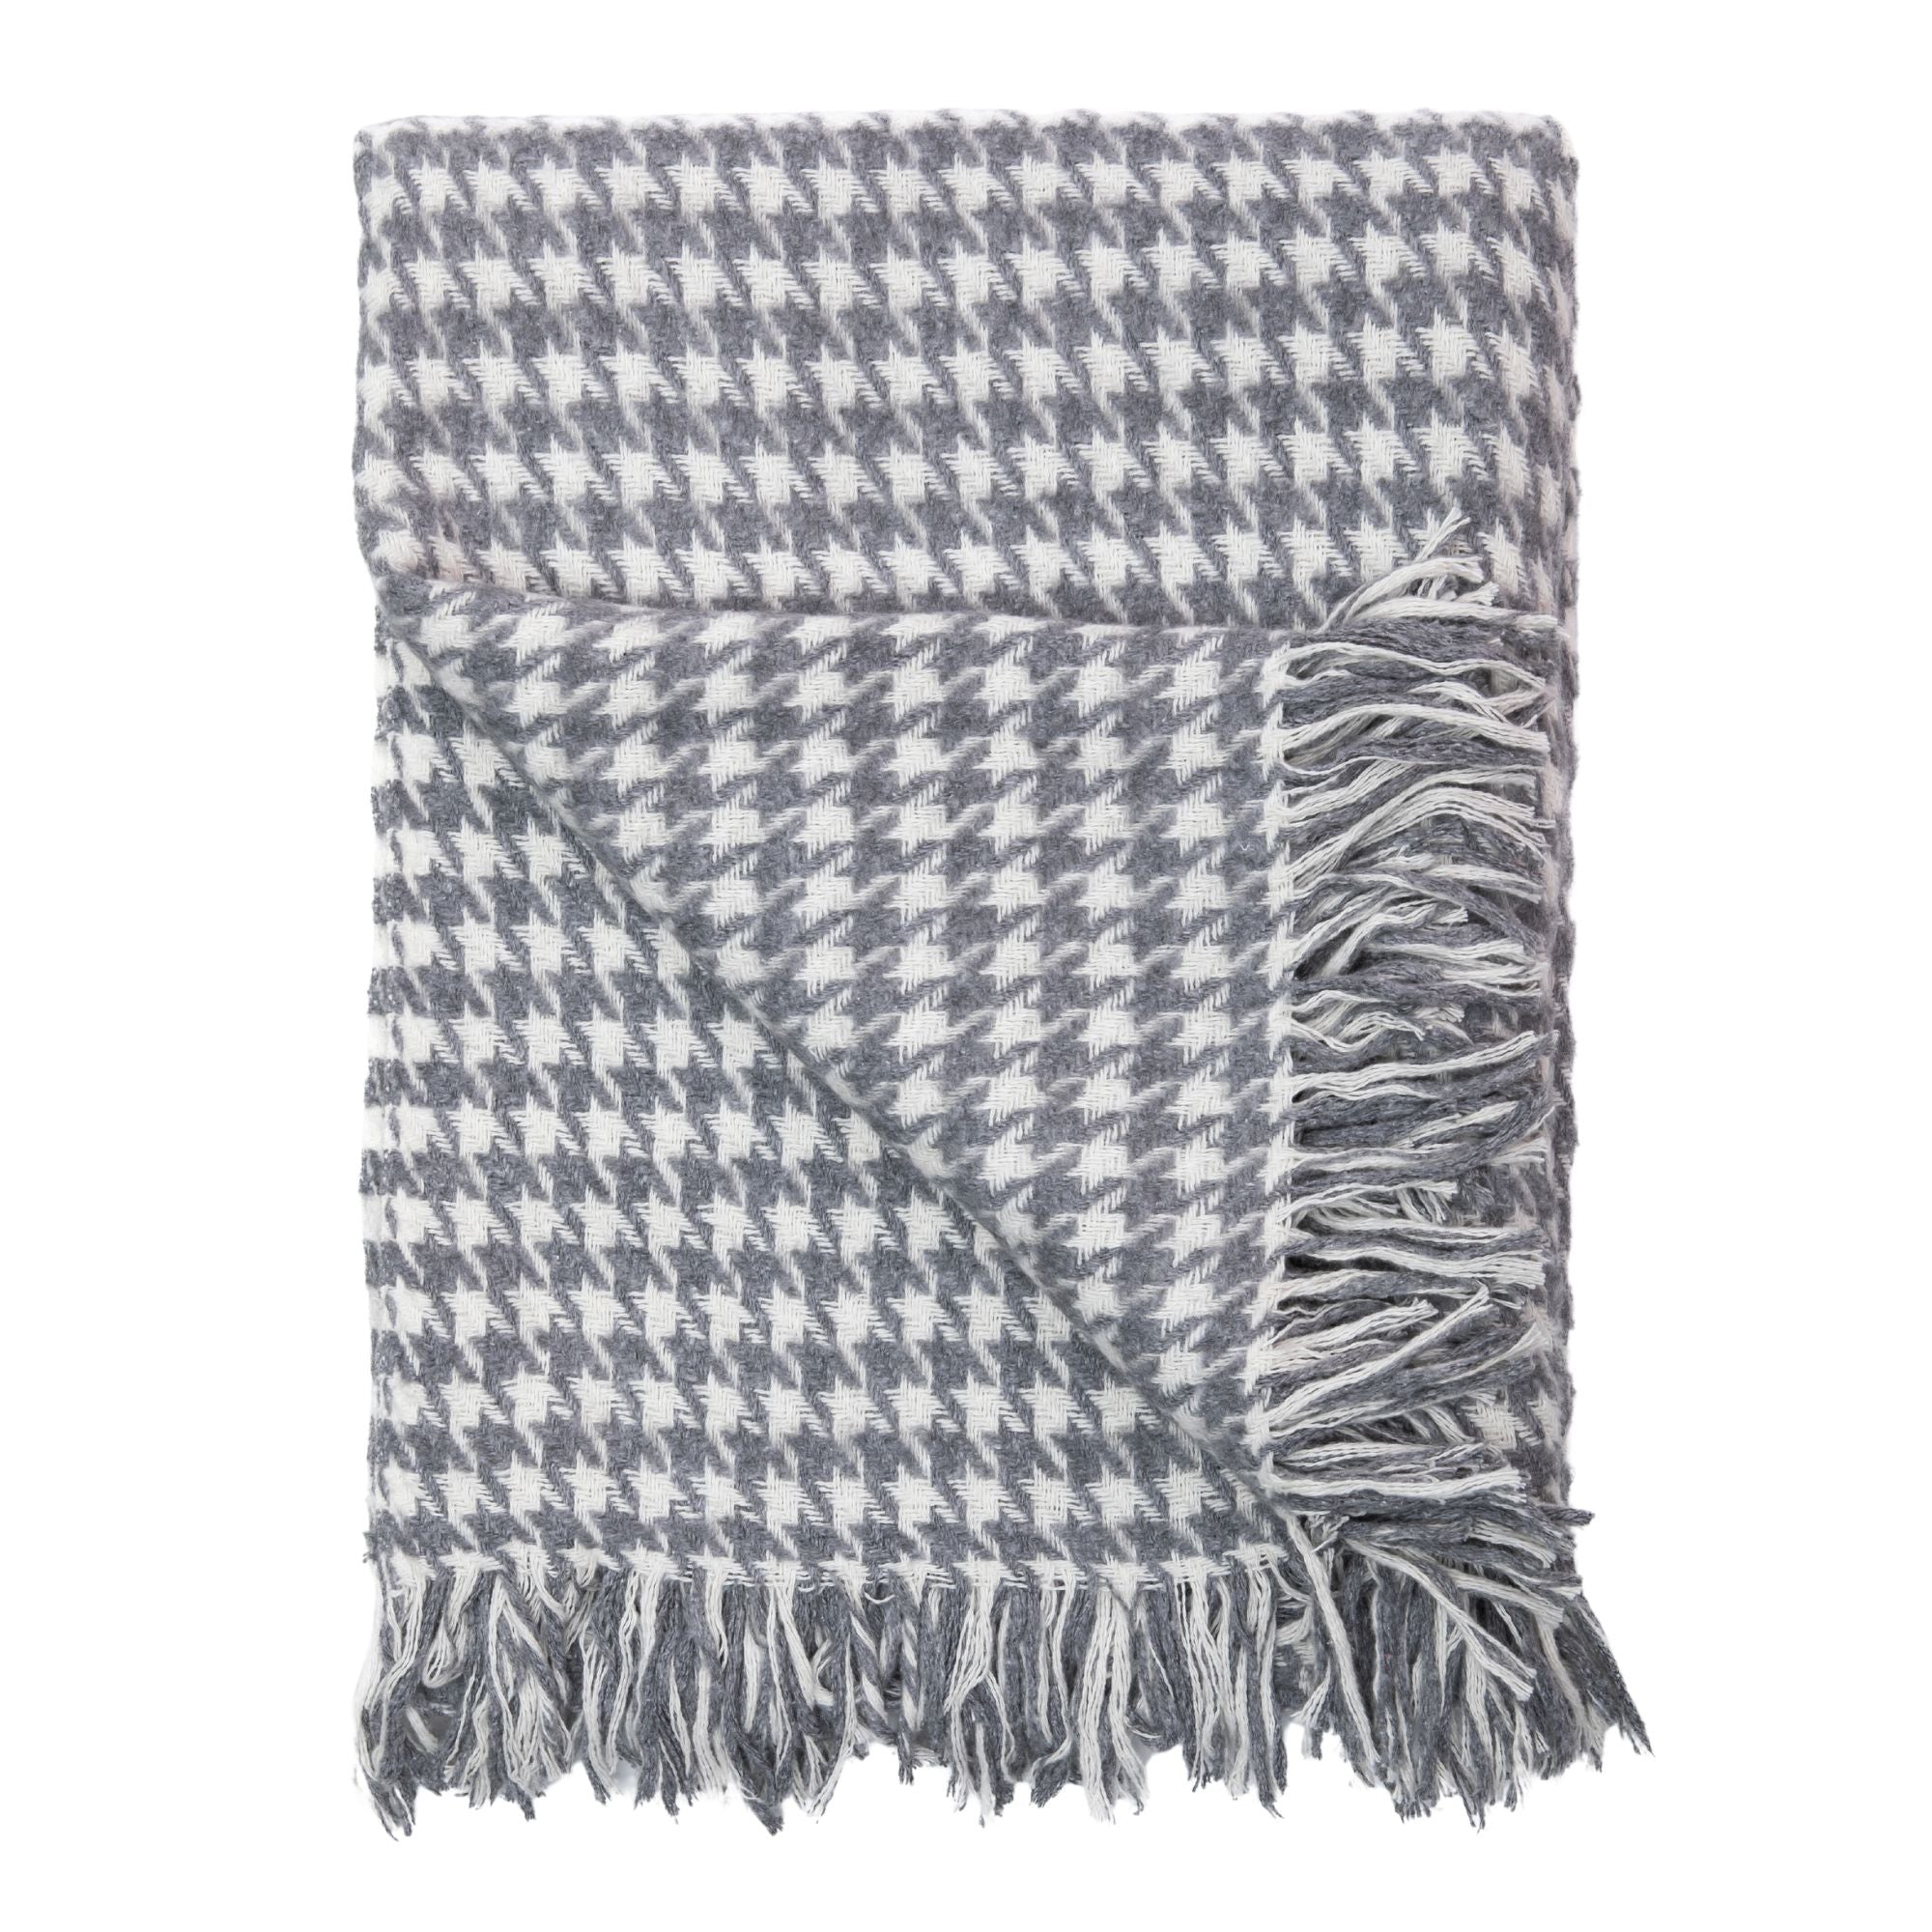 Trimita | Close-up view of the Grey Houndstooth Luxury Throw Blanket on a white background, highlighting the intricate weaving details and texture